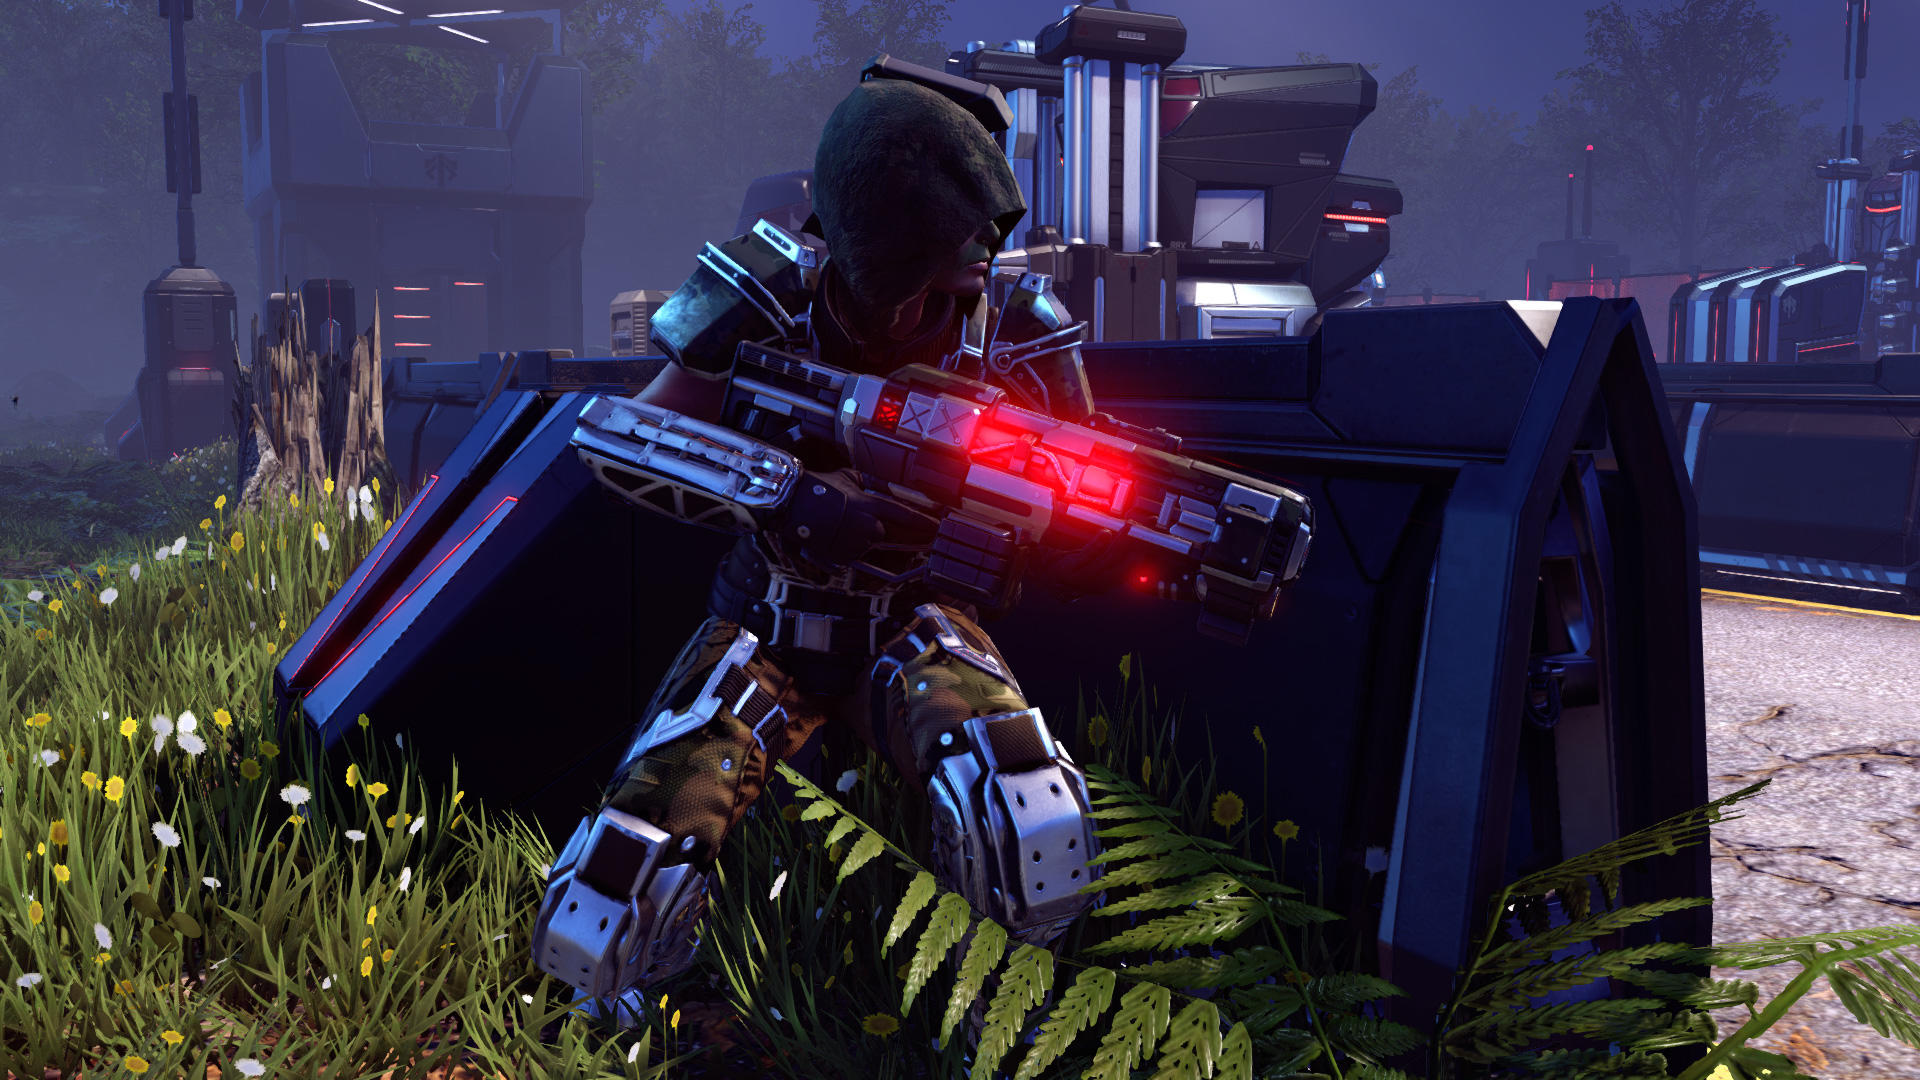 Article Discusses Potential XCOM-Like Spinoffs